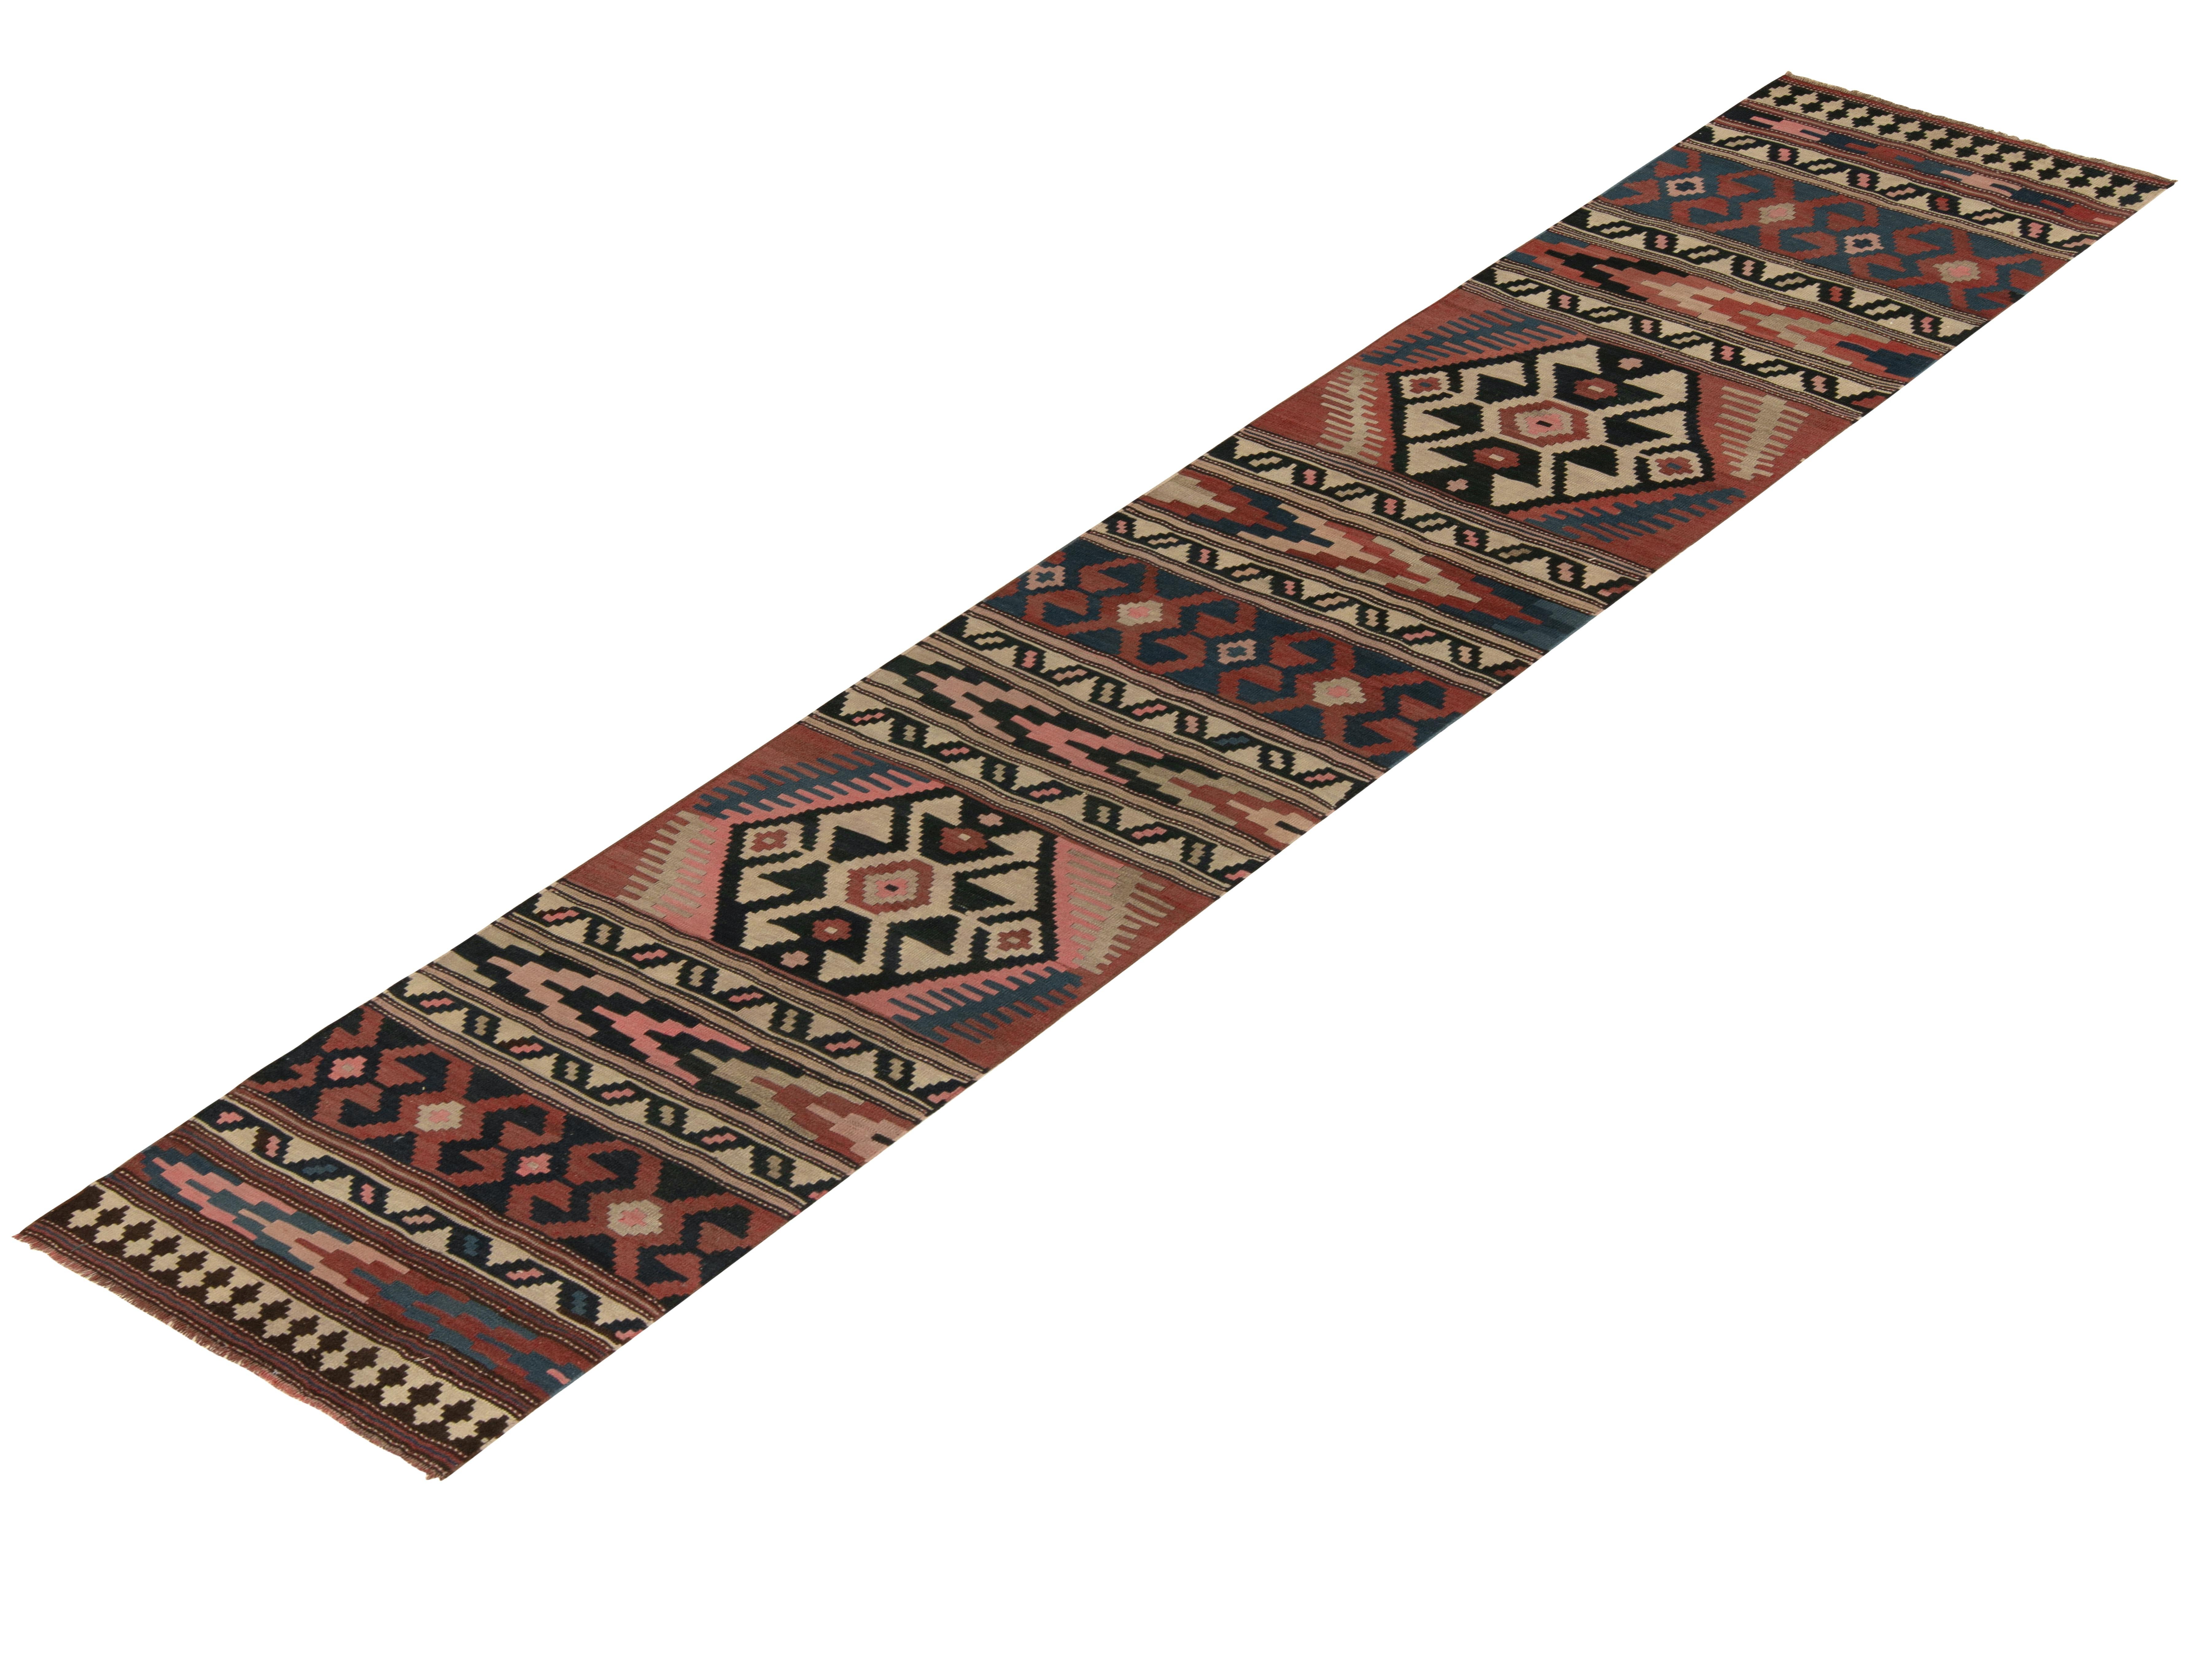 Hailing from Turkey circa 1950-1960, a rare mid-century kilim runner, now joining Rug & Kilim’s coveted vintage selections. 

The unusual tribal design revels in rare pink accents to the beige-brown, red and blue colorway lending a playful mood to